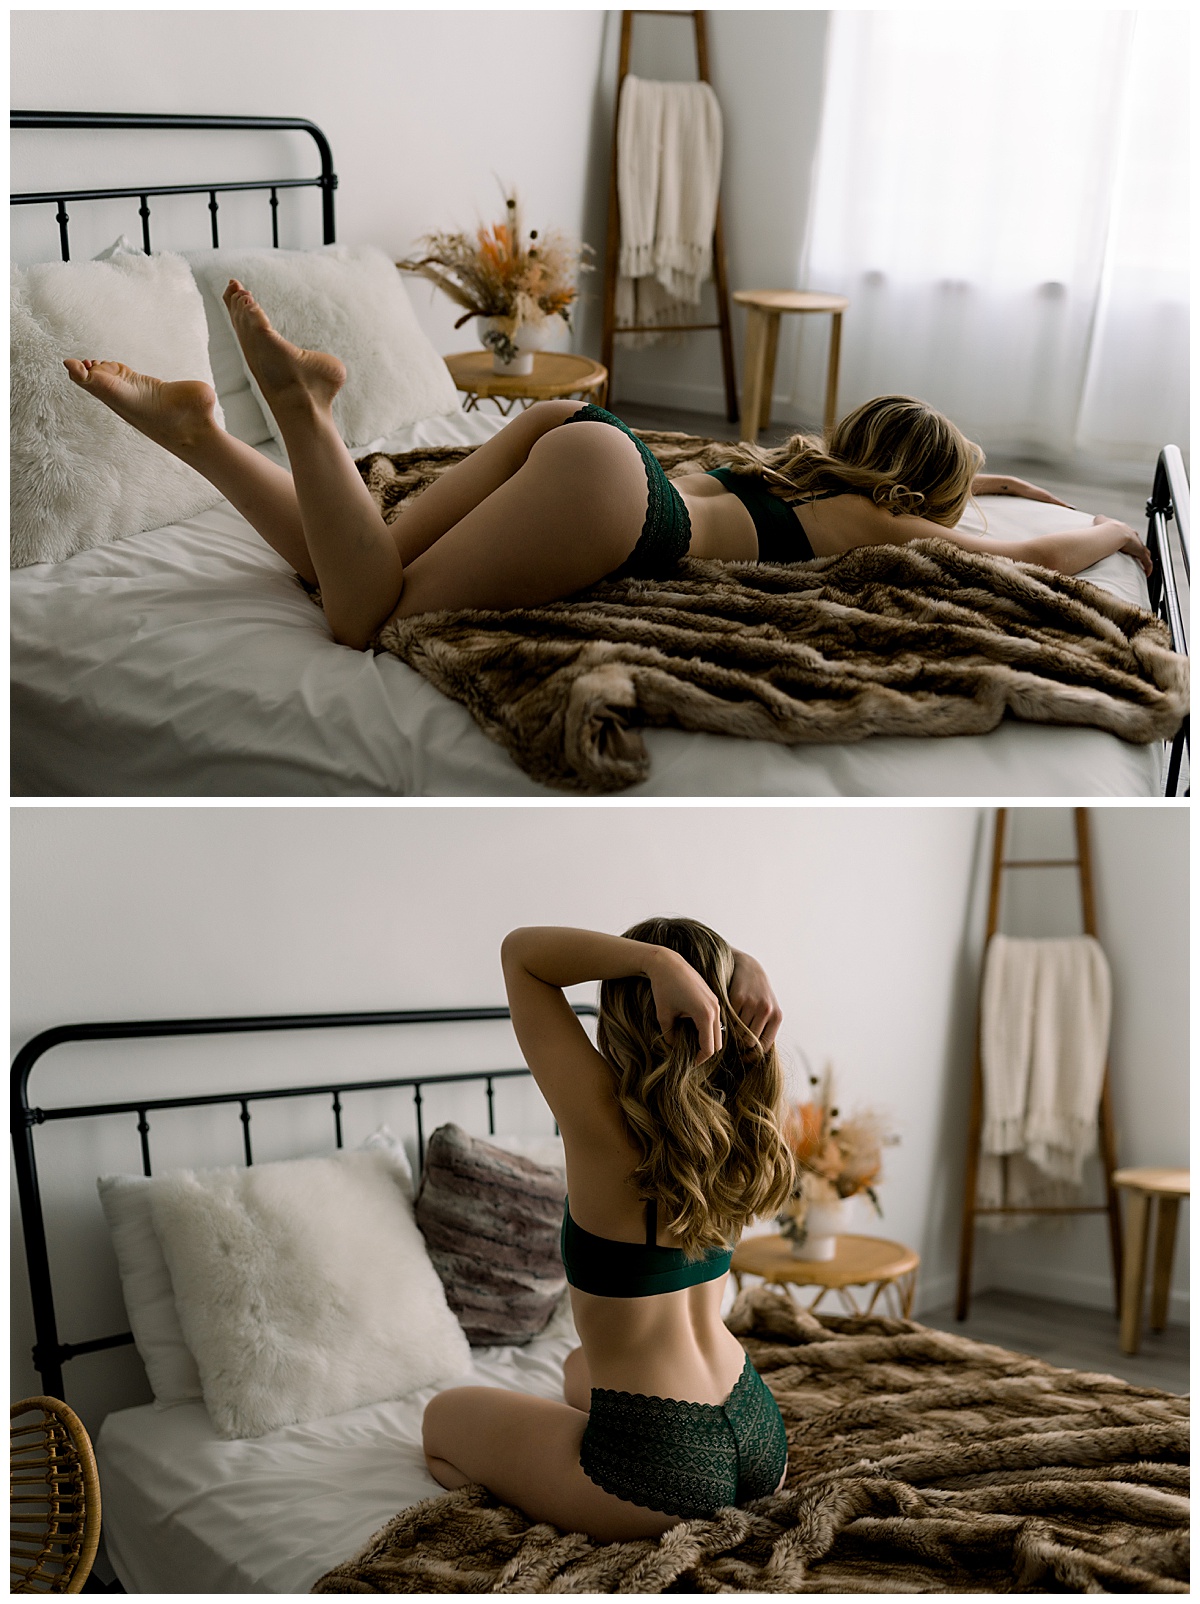 Female lays on bed wearing green lingerie for Emma Christine Photography